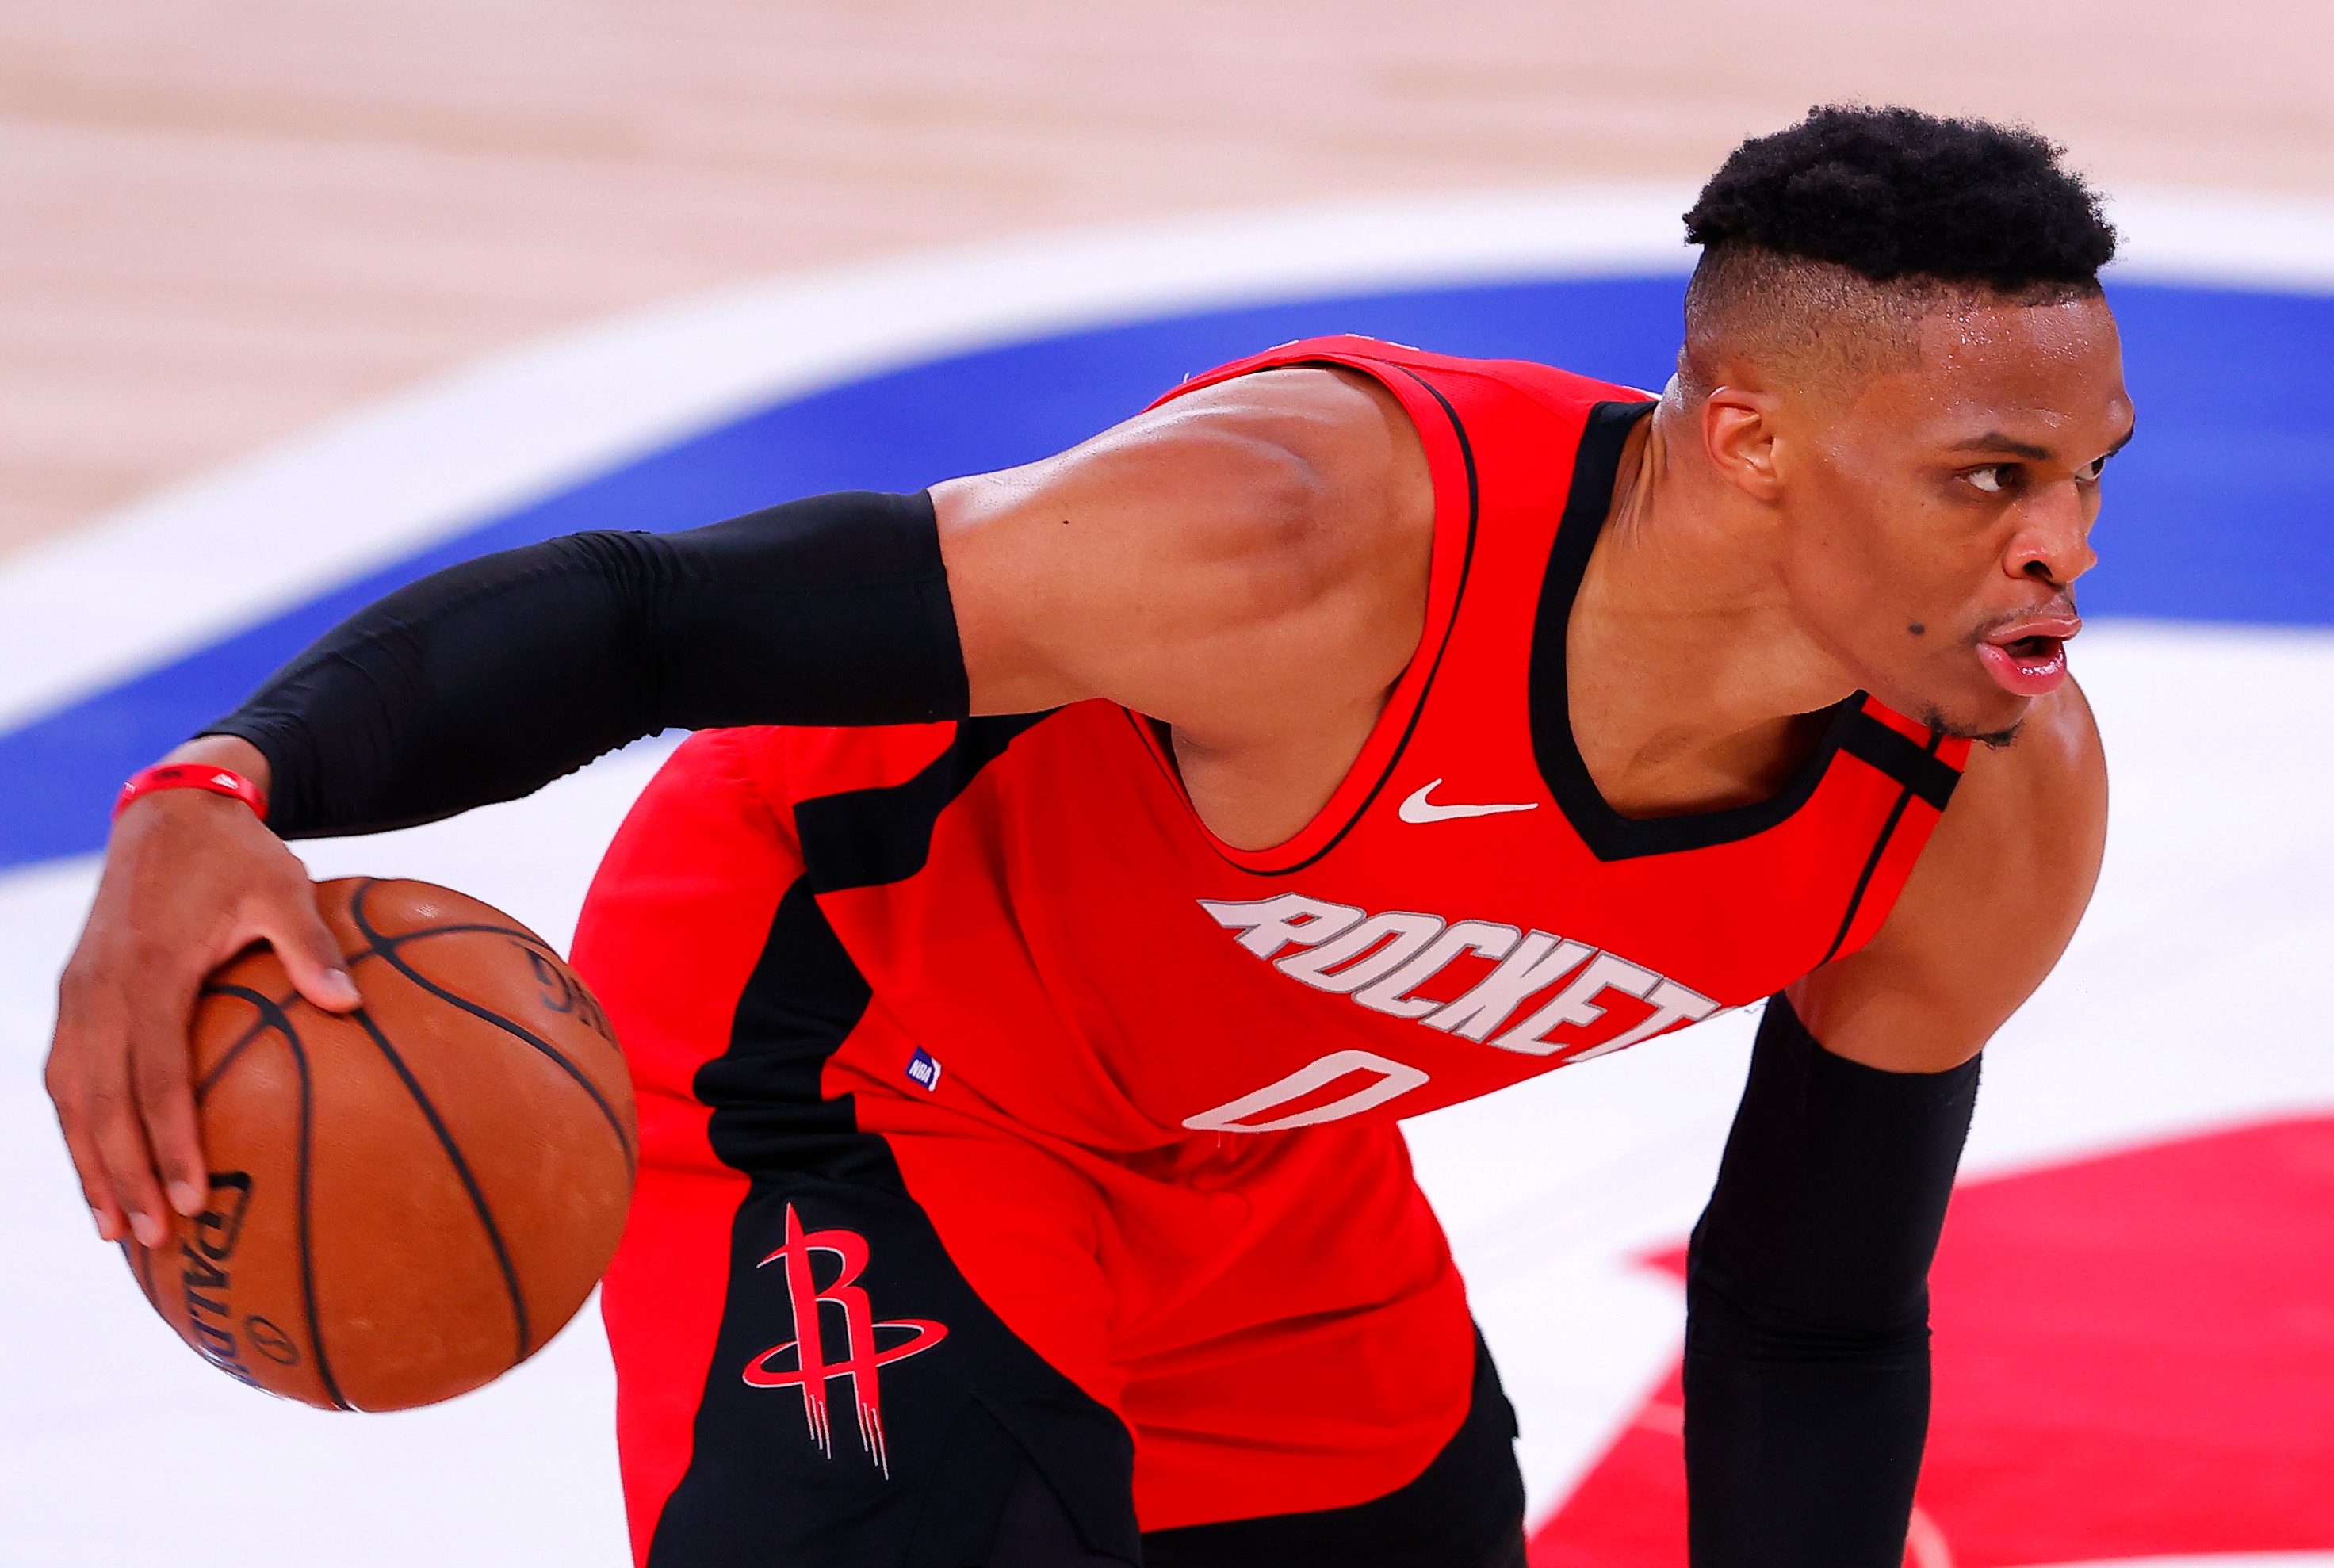 Westbrook shines late for Rockets as Bucks crumble